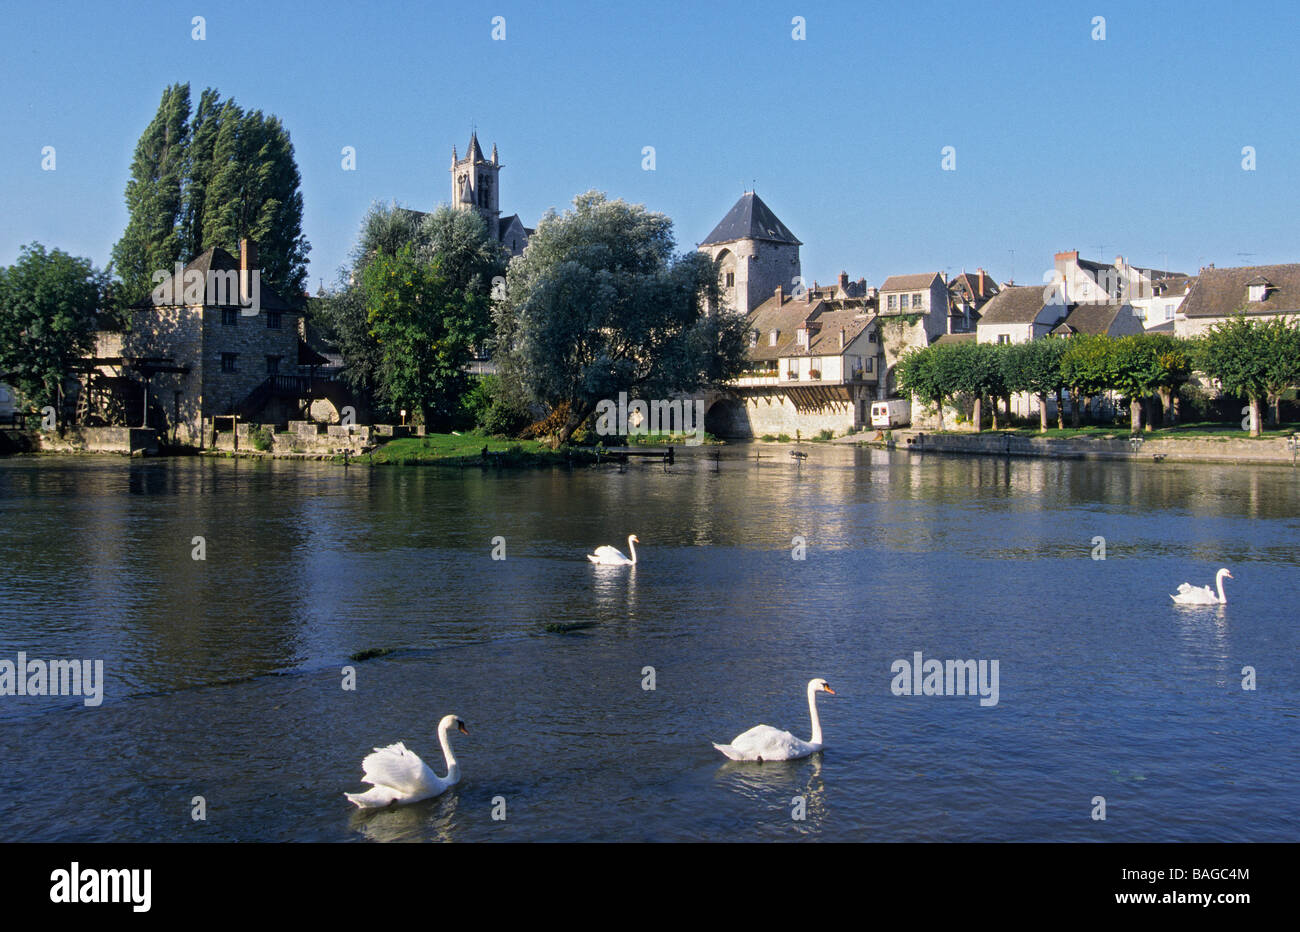 France, Seine et Marne, Moret sur Loing, Vallee du Loing, views of the village, bridge and mills on a river isle Stock Photo